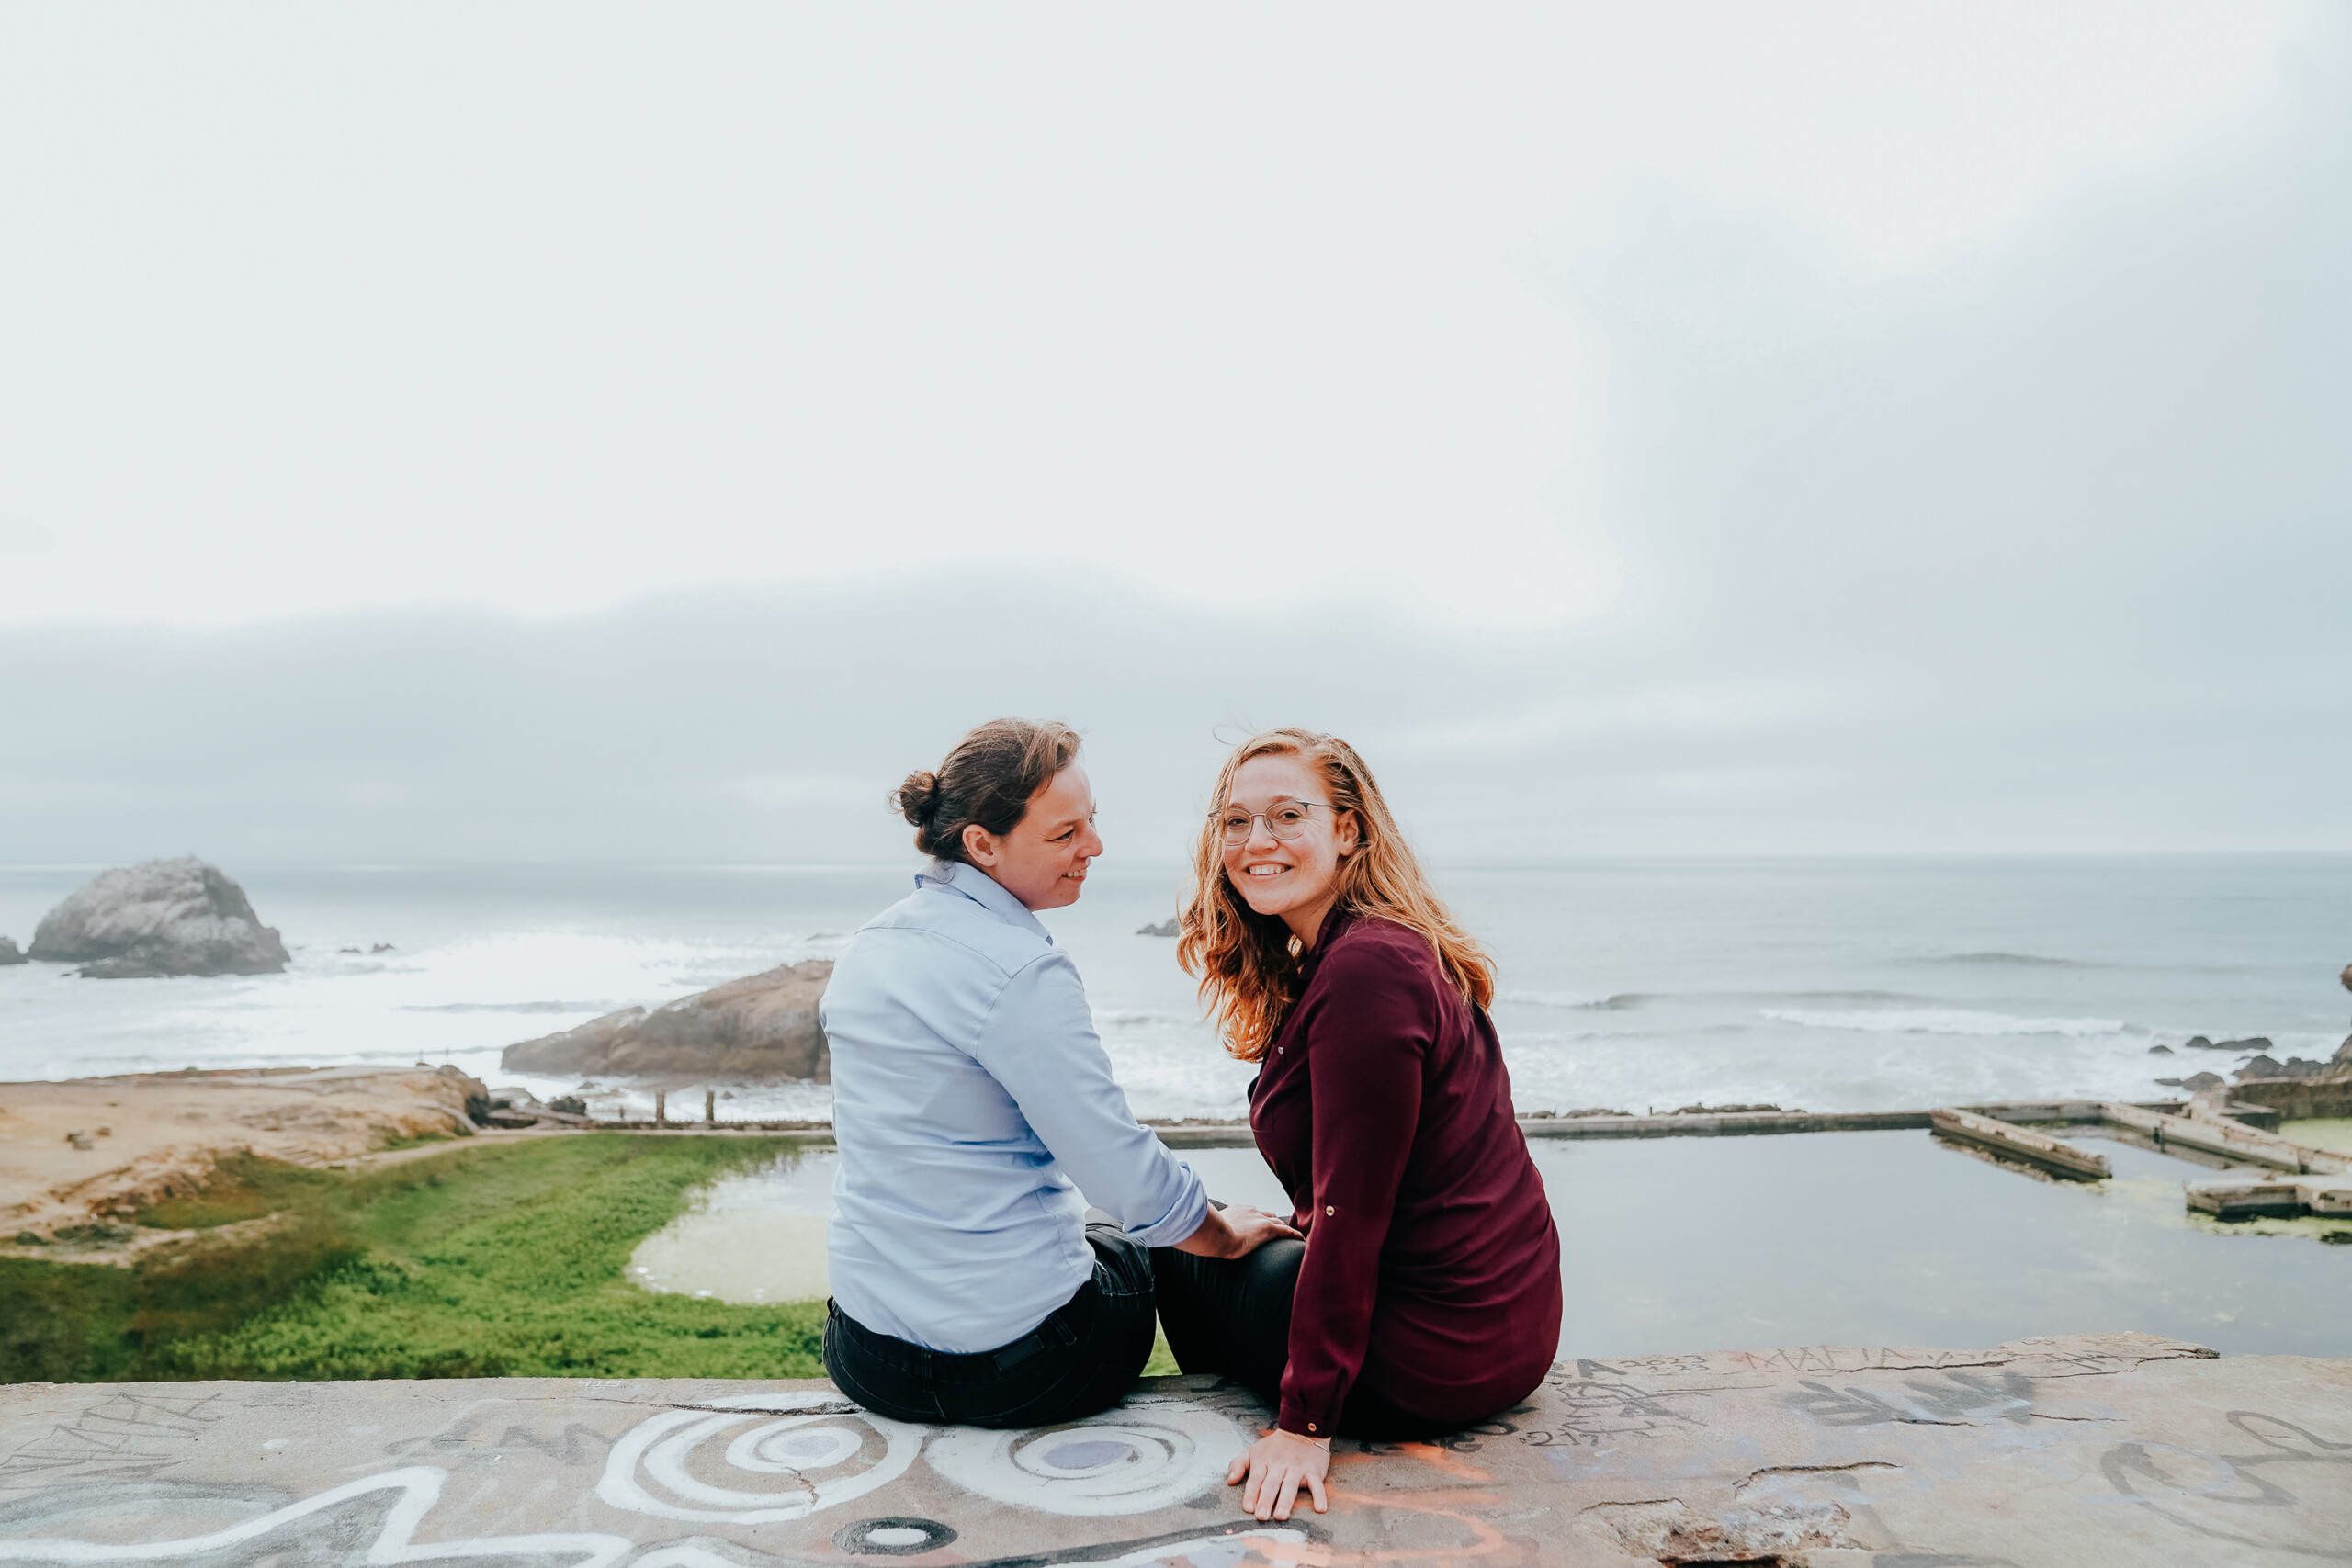 Proposal photoshoot by Joss, Localgrapher in San Francisco